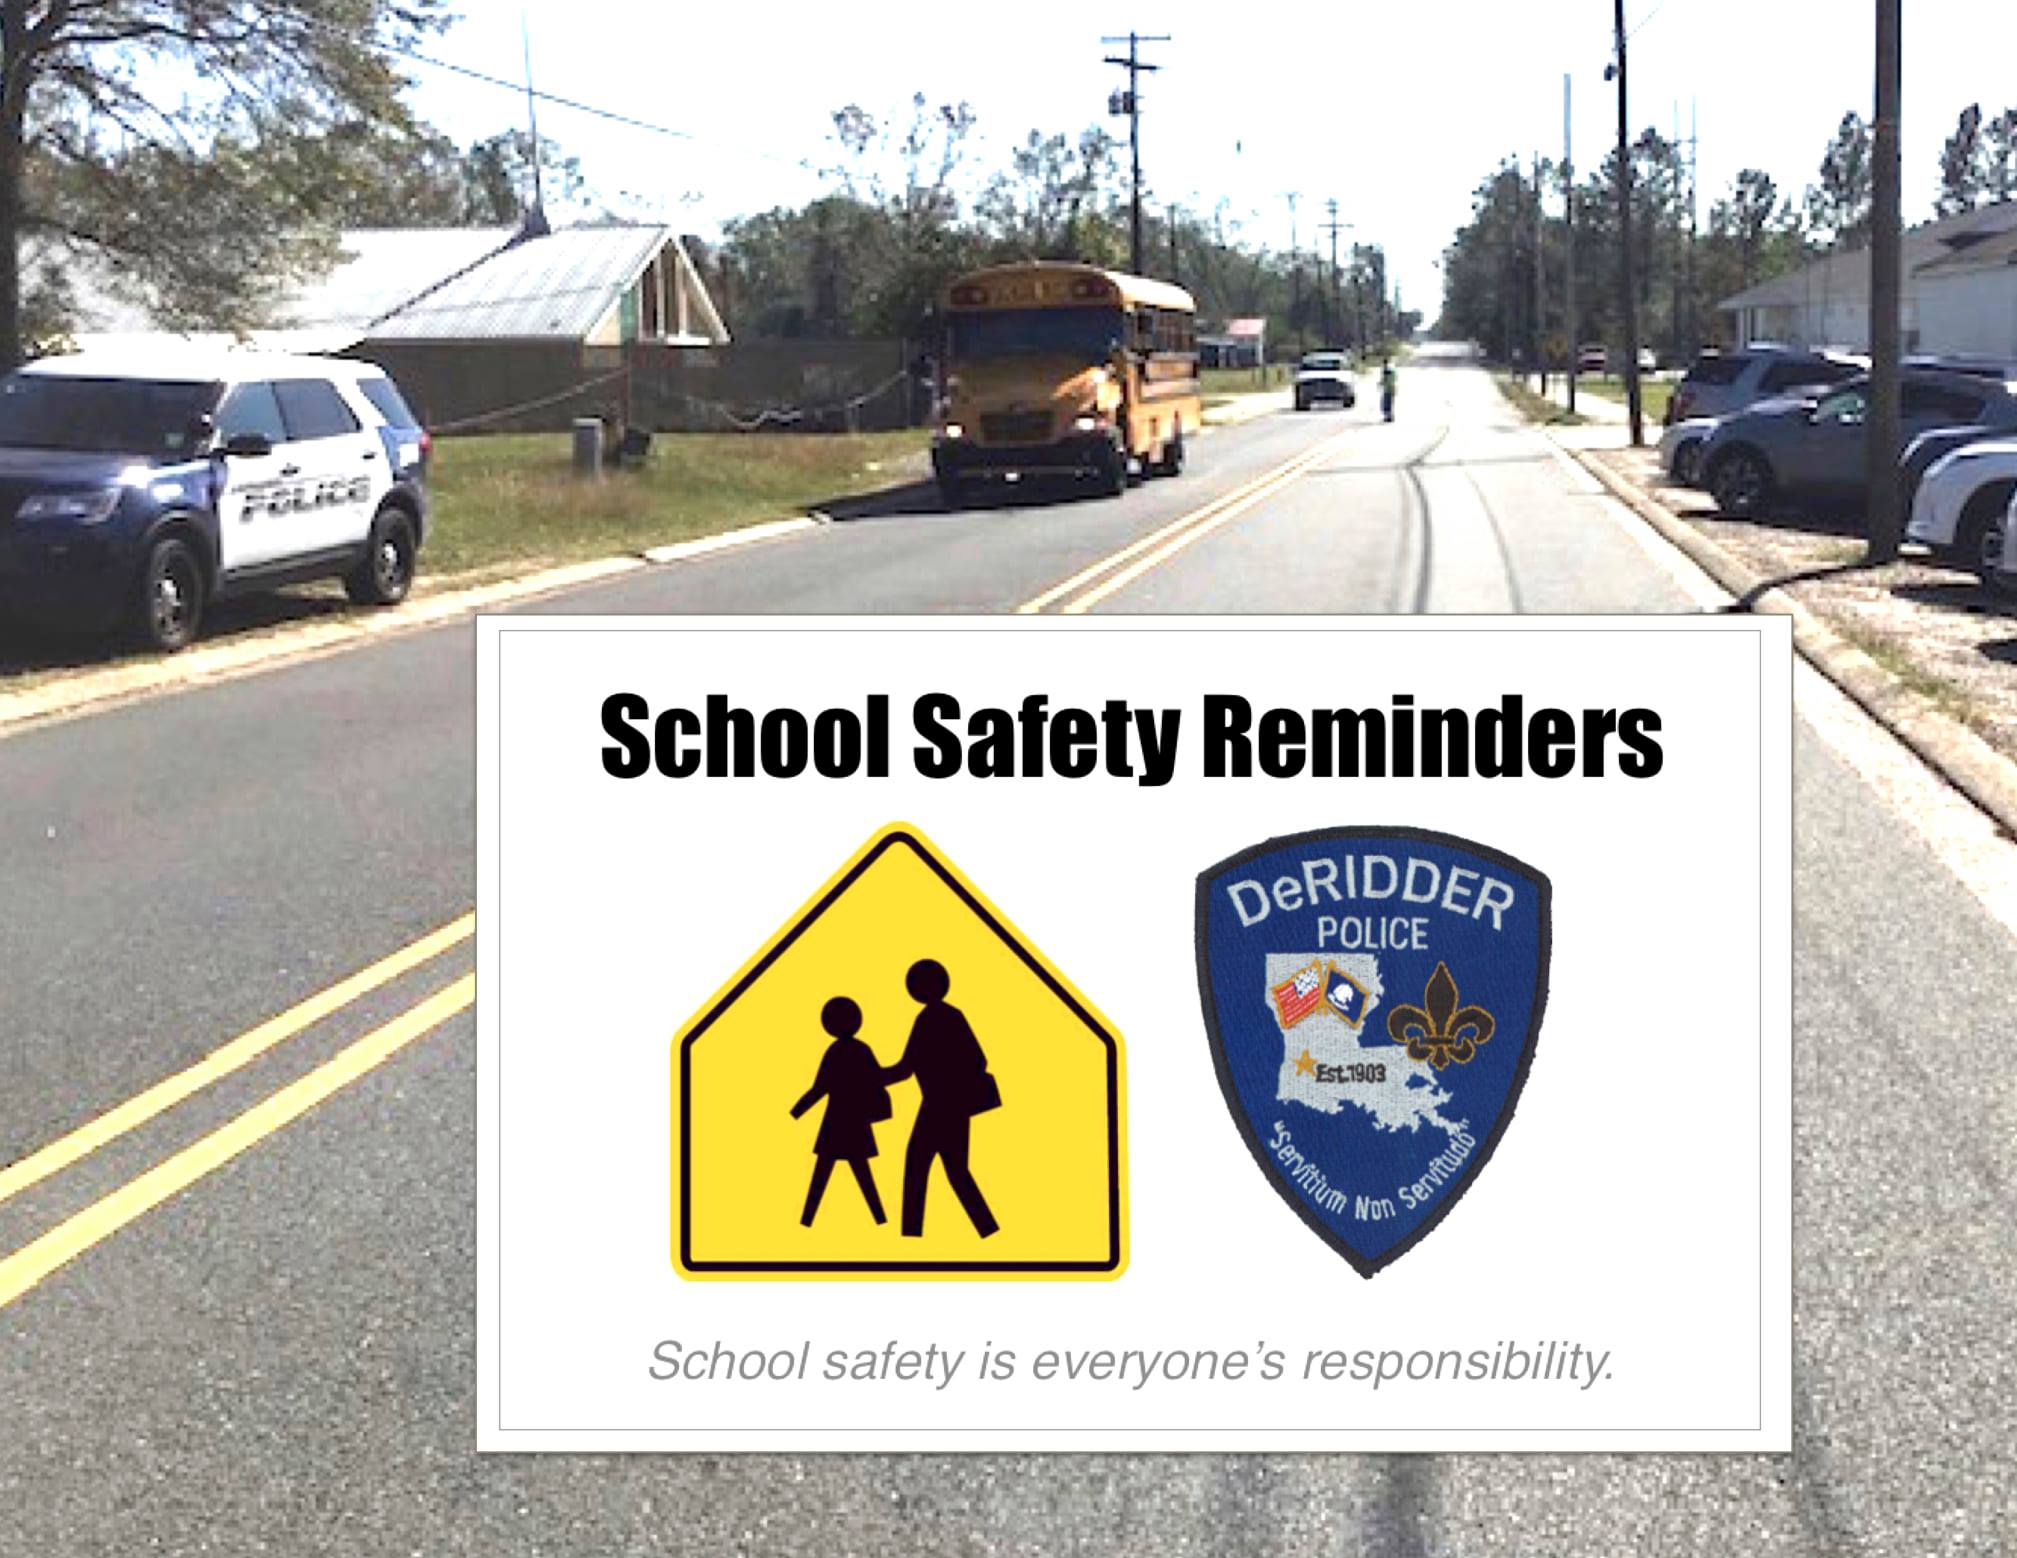 The DeRidder Police Department is reminding residents about school safety.